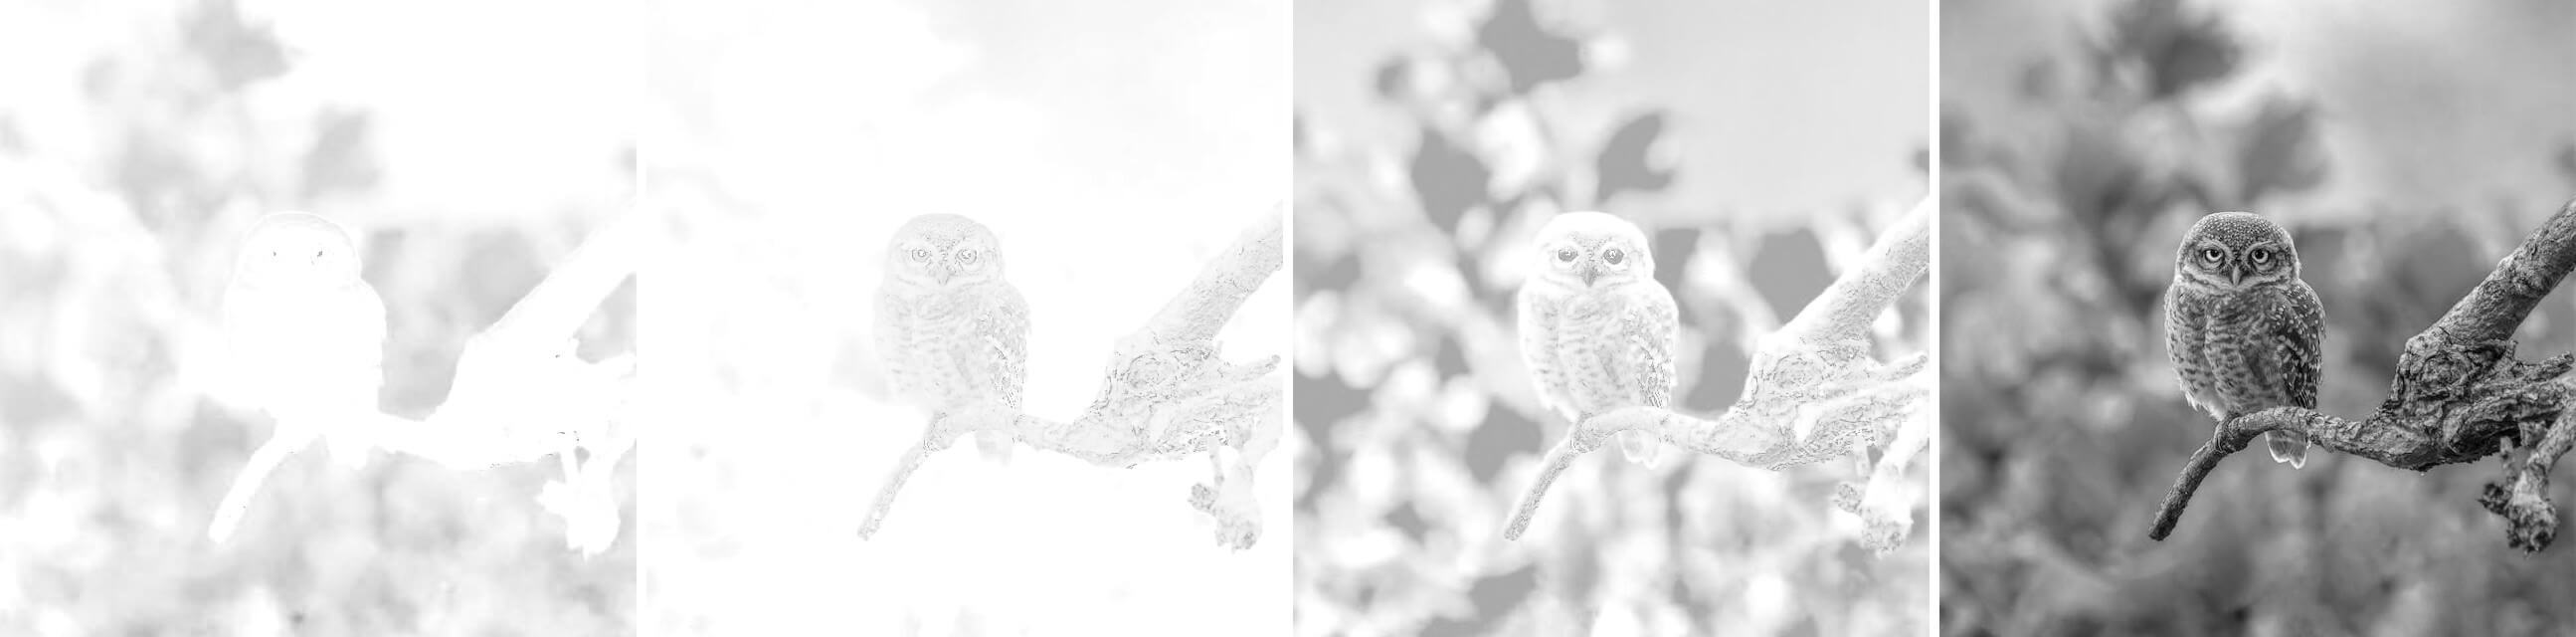 In this example, we convert a PNG image of an adorable owl into all the channels of the CMYK color space. Subsequently, we activate the option to convert the channels into grayscale tones to compare the images under equal conditions. In the monochrome version, we can observe that yellow describes the PNG much better compared to cyan or magenta, while cyan is entirely absent in the owl's pixels. (Source: Pexels.)